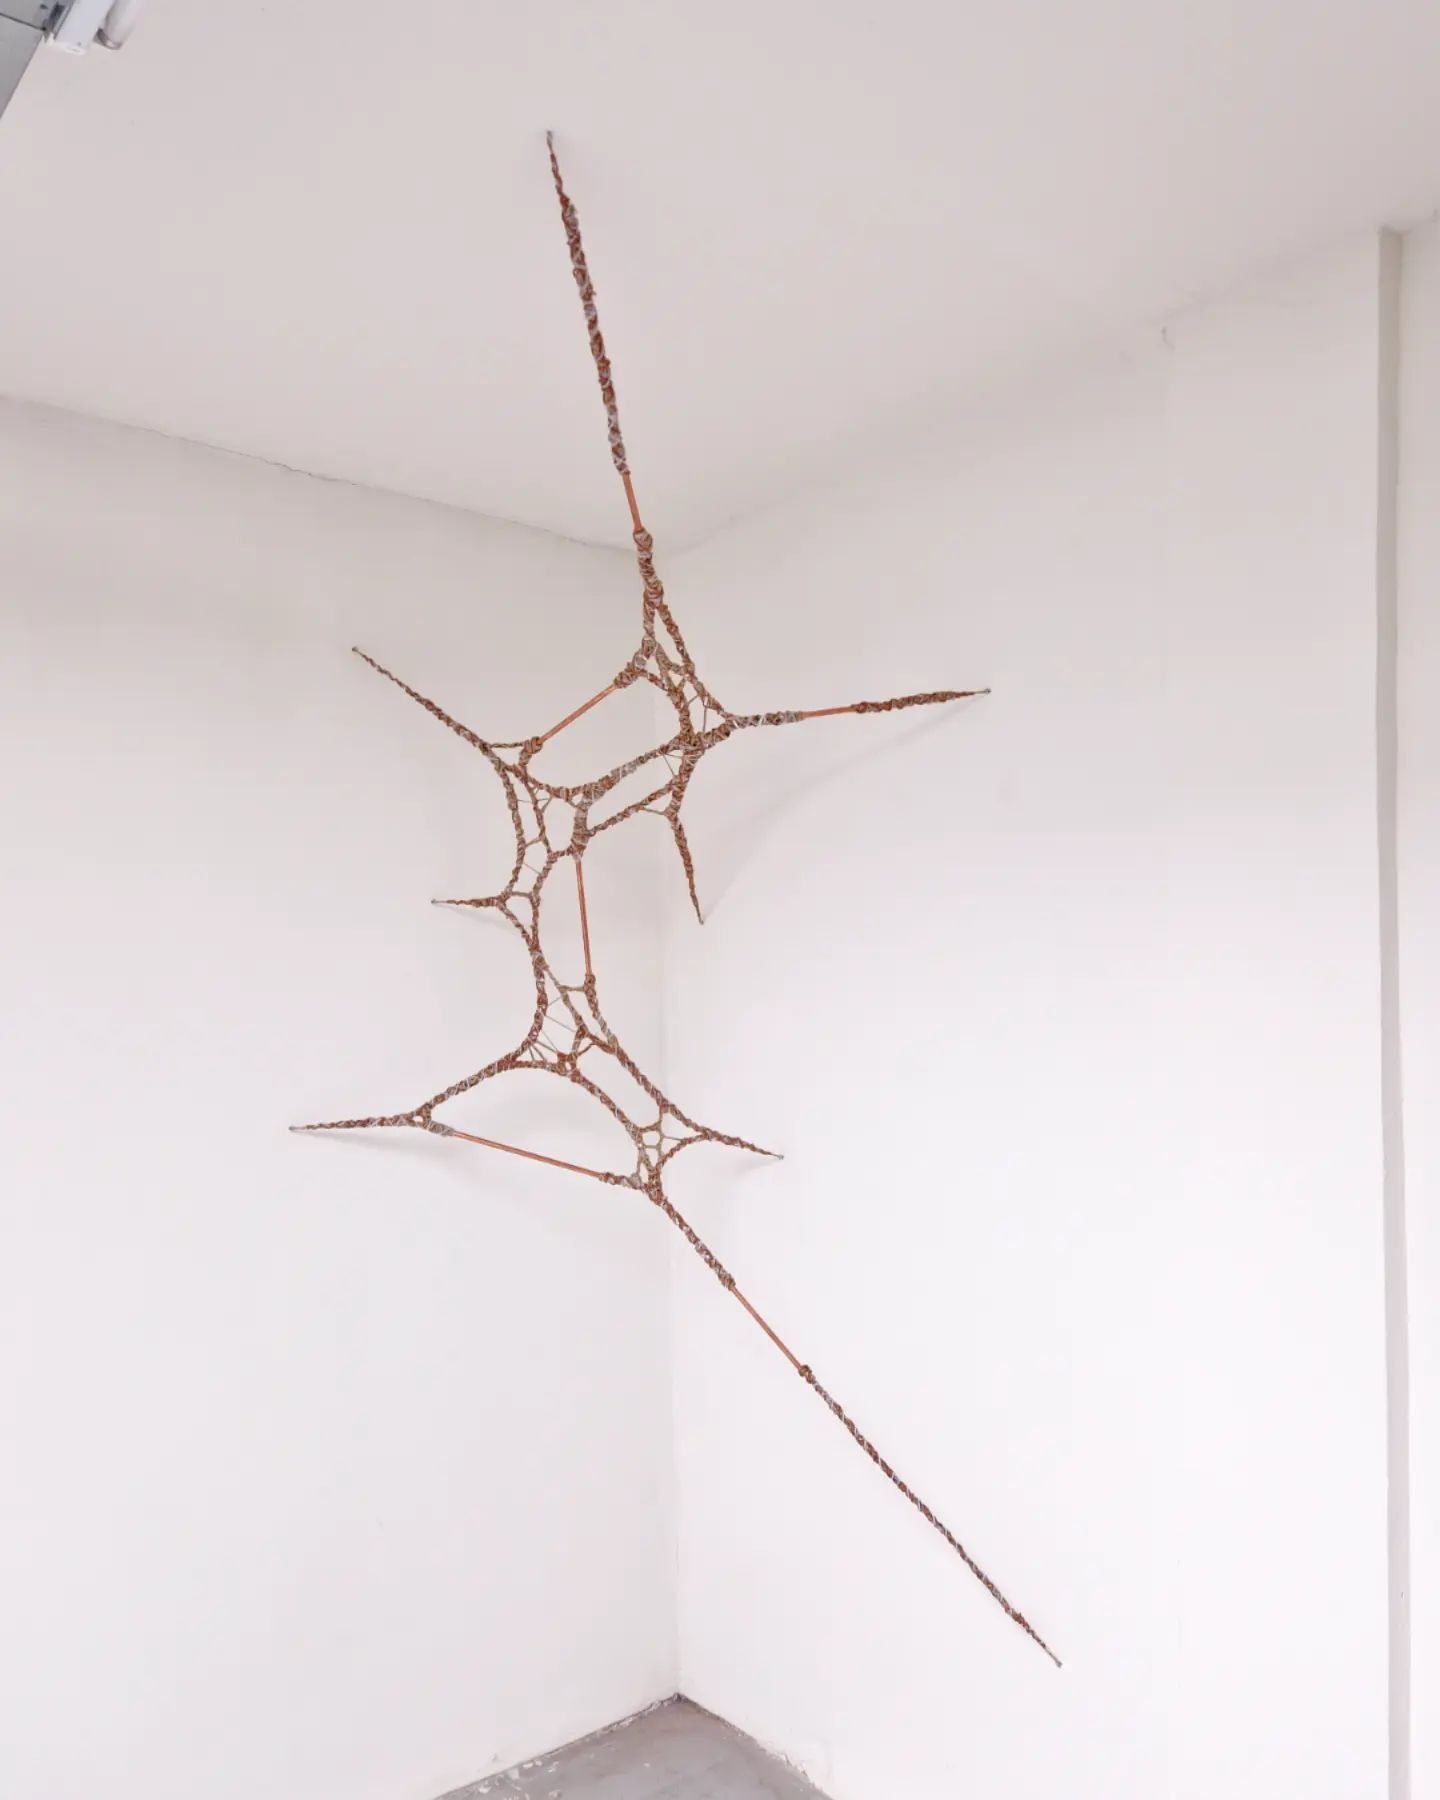 Made specifically for the show (P)REVIEW 1. Can be seen and bought via @franktaalgallery

24#1
&euro;6000
Approx dimensions 250 x 100
2024

#newwork #installationart #foundmaterials #corner #string